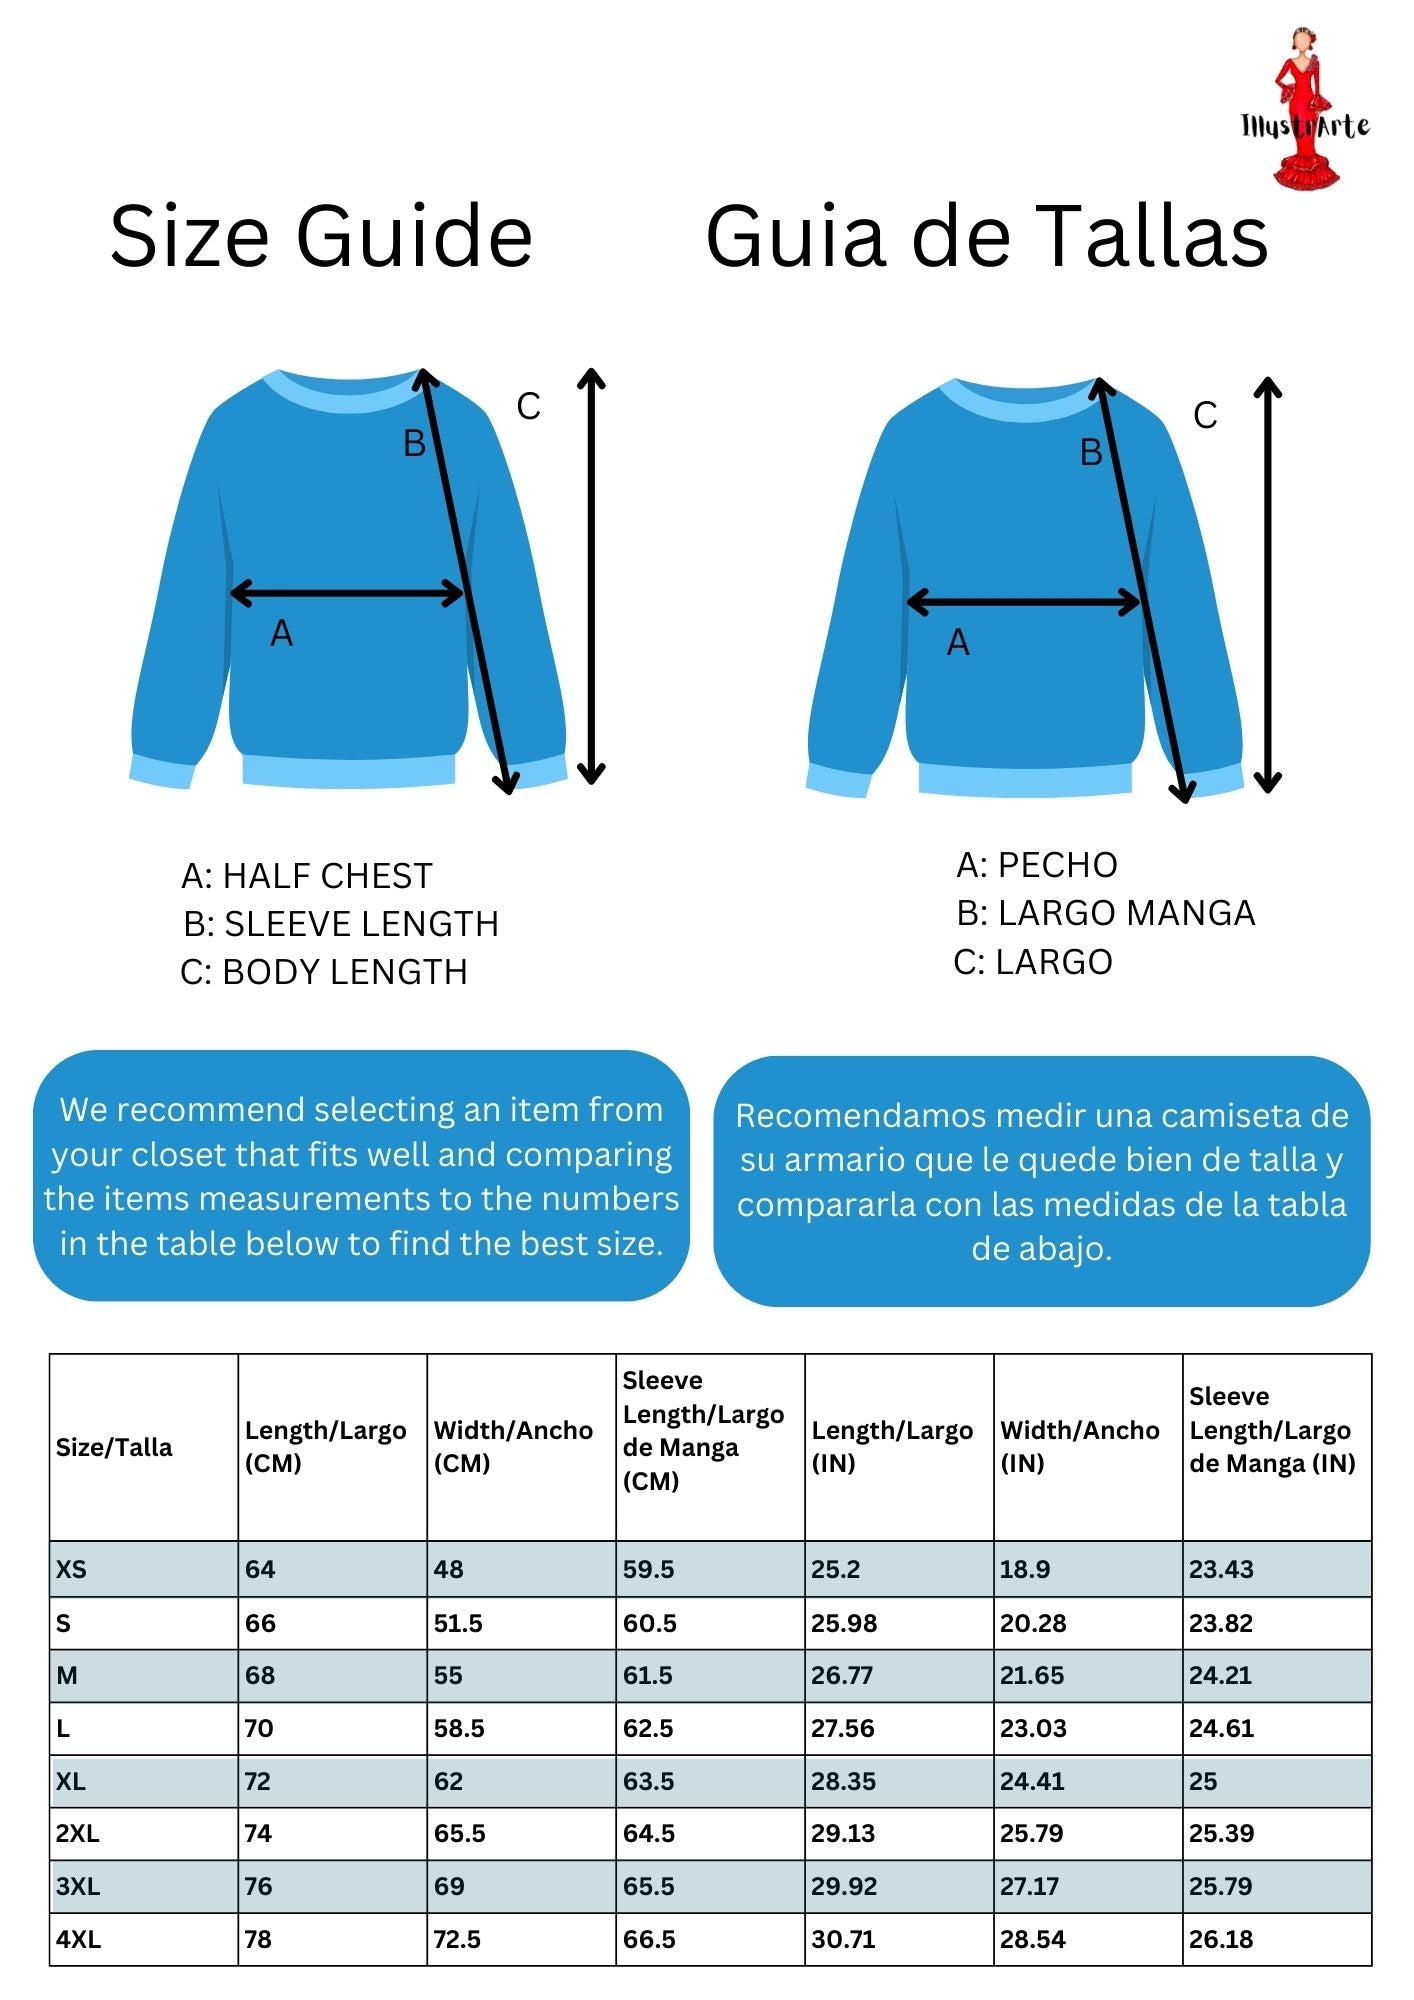 the size guide for a long - sleeved t - shirt